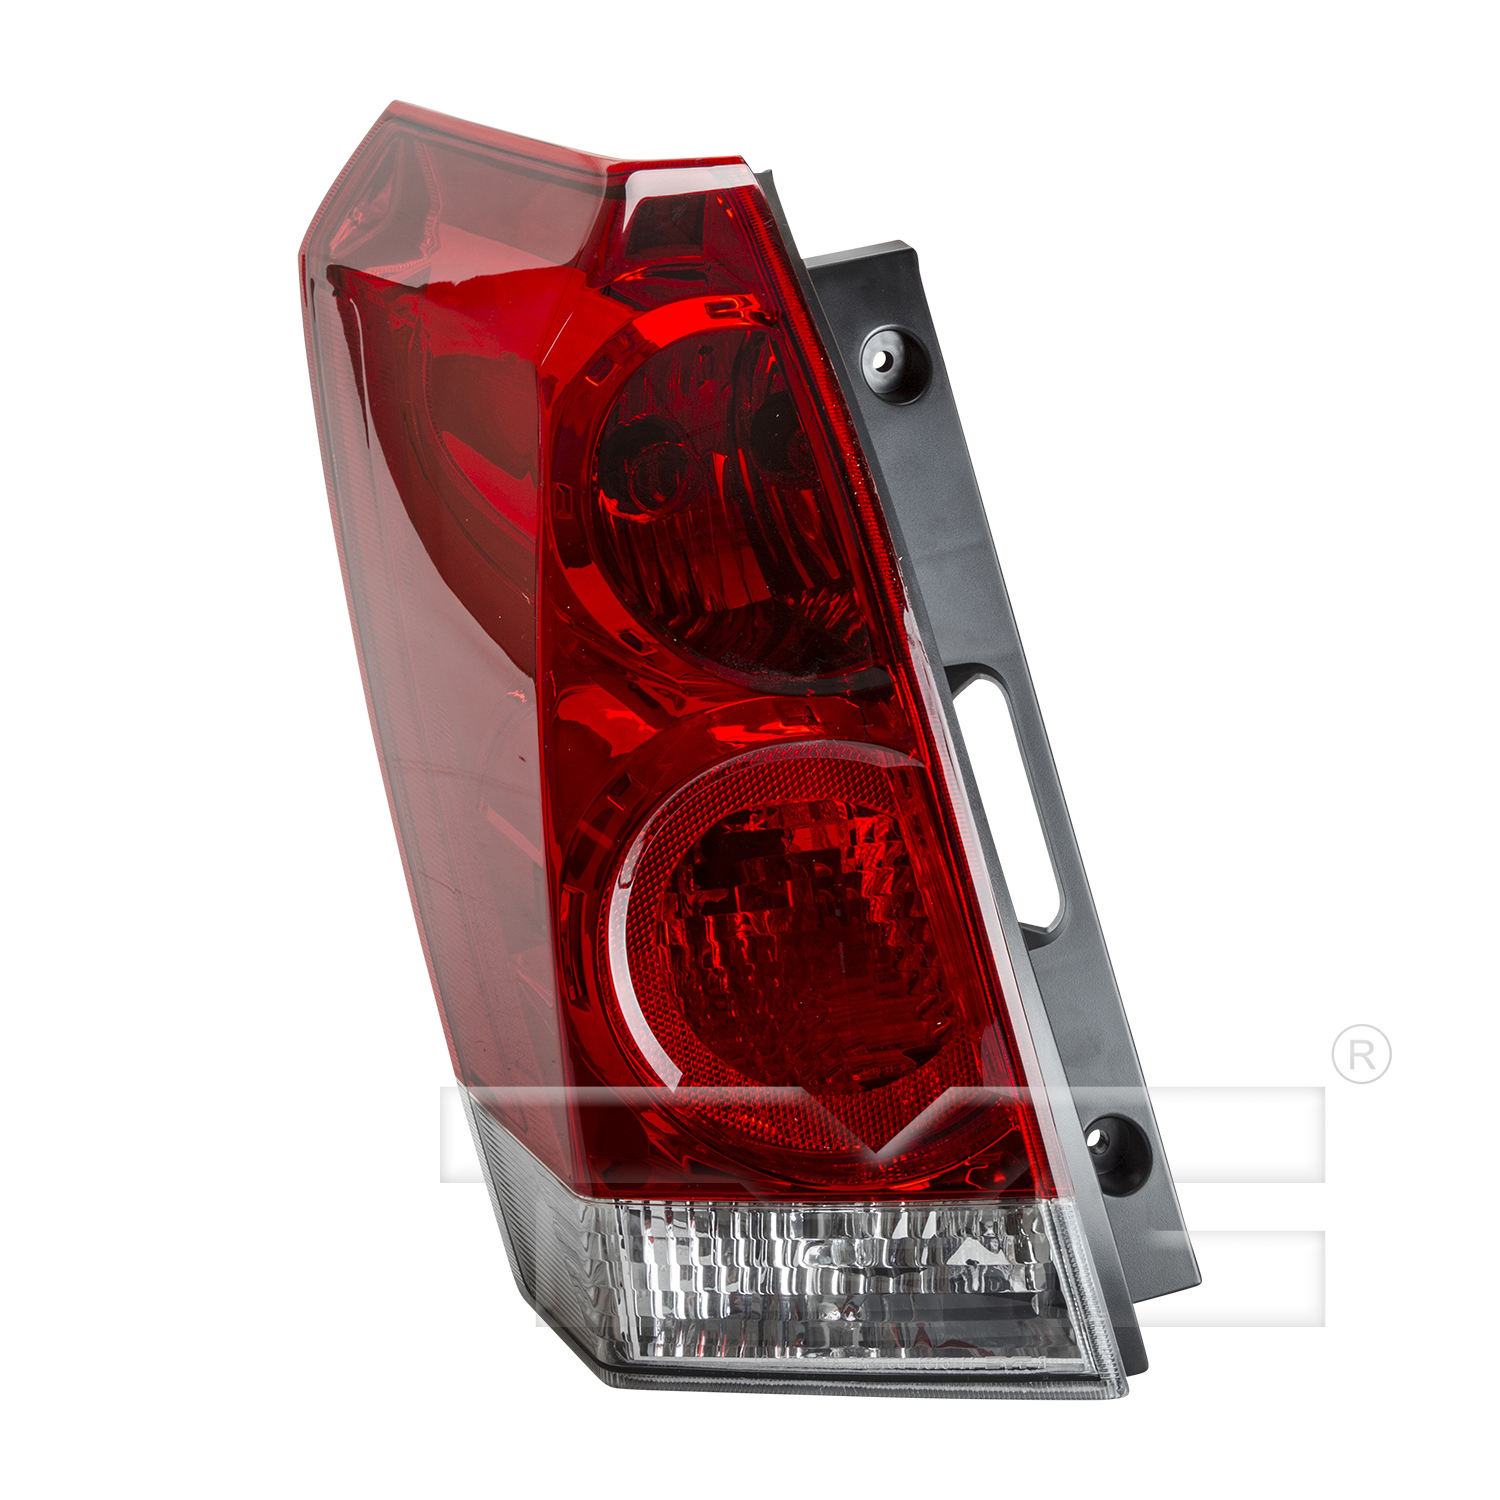 Aftermarket TAILLIGHTS for NISSAN - QUEST, QUEST,04-09,LT Taillamp assy